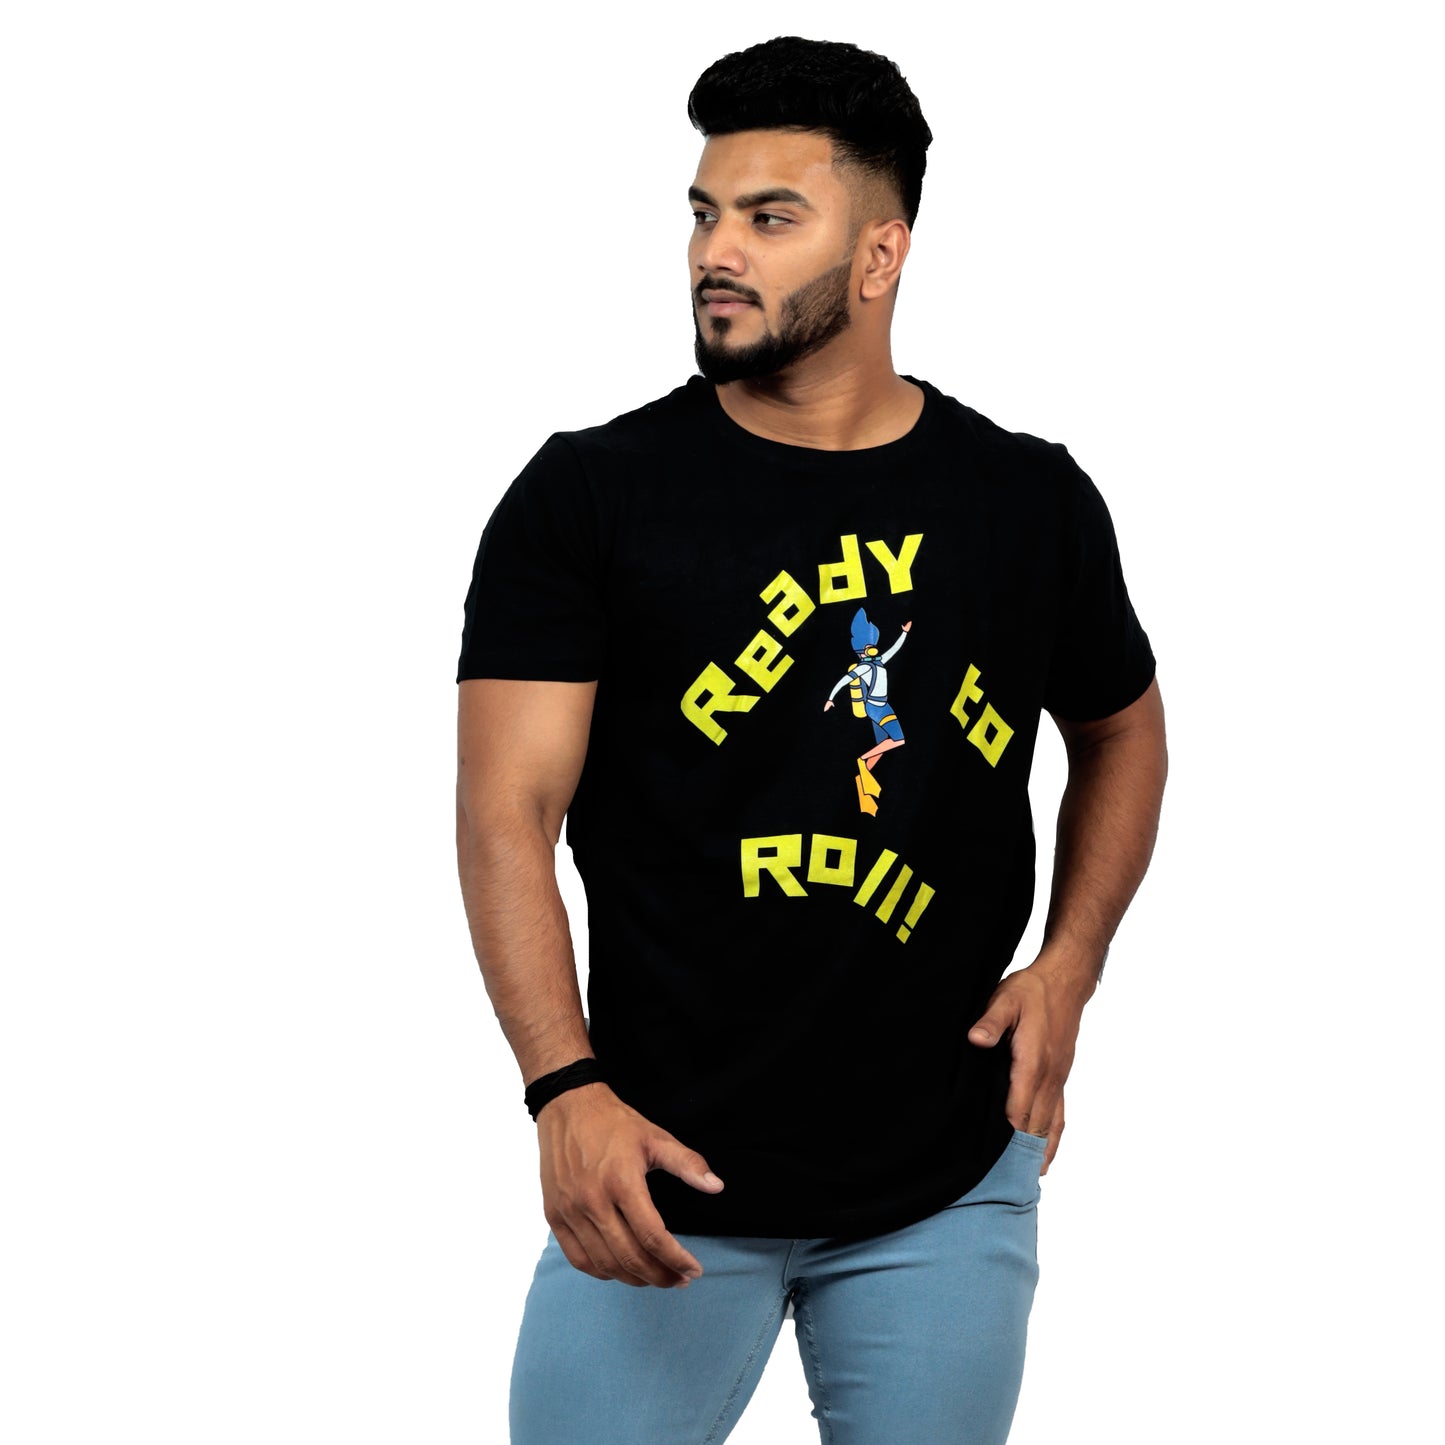 Ready To Roll T-Shirt In Black Color For Men